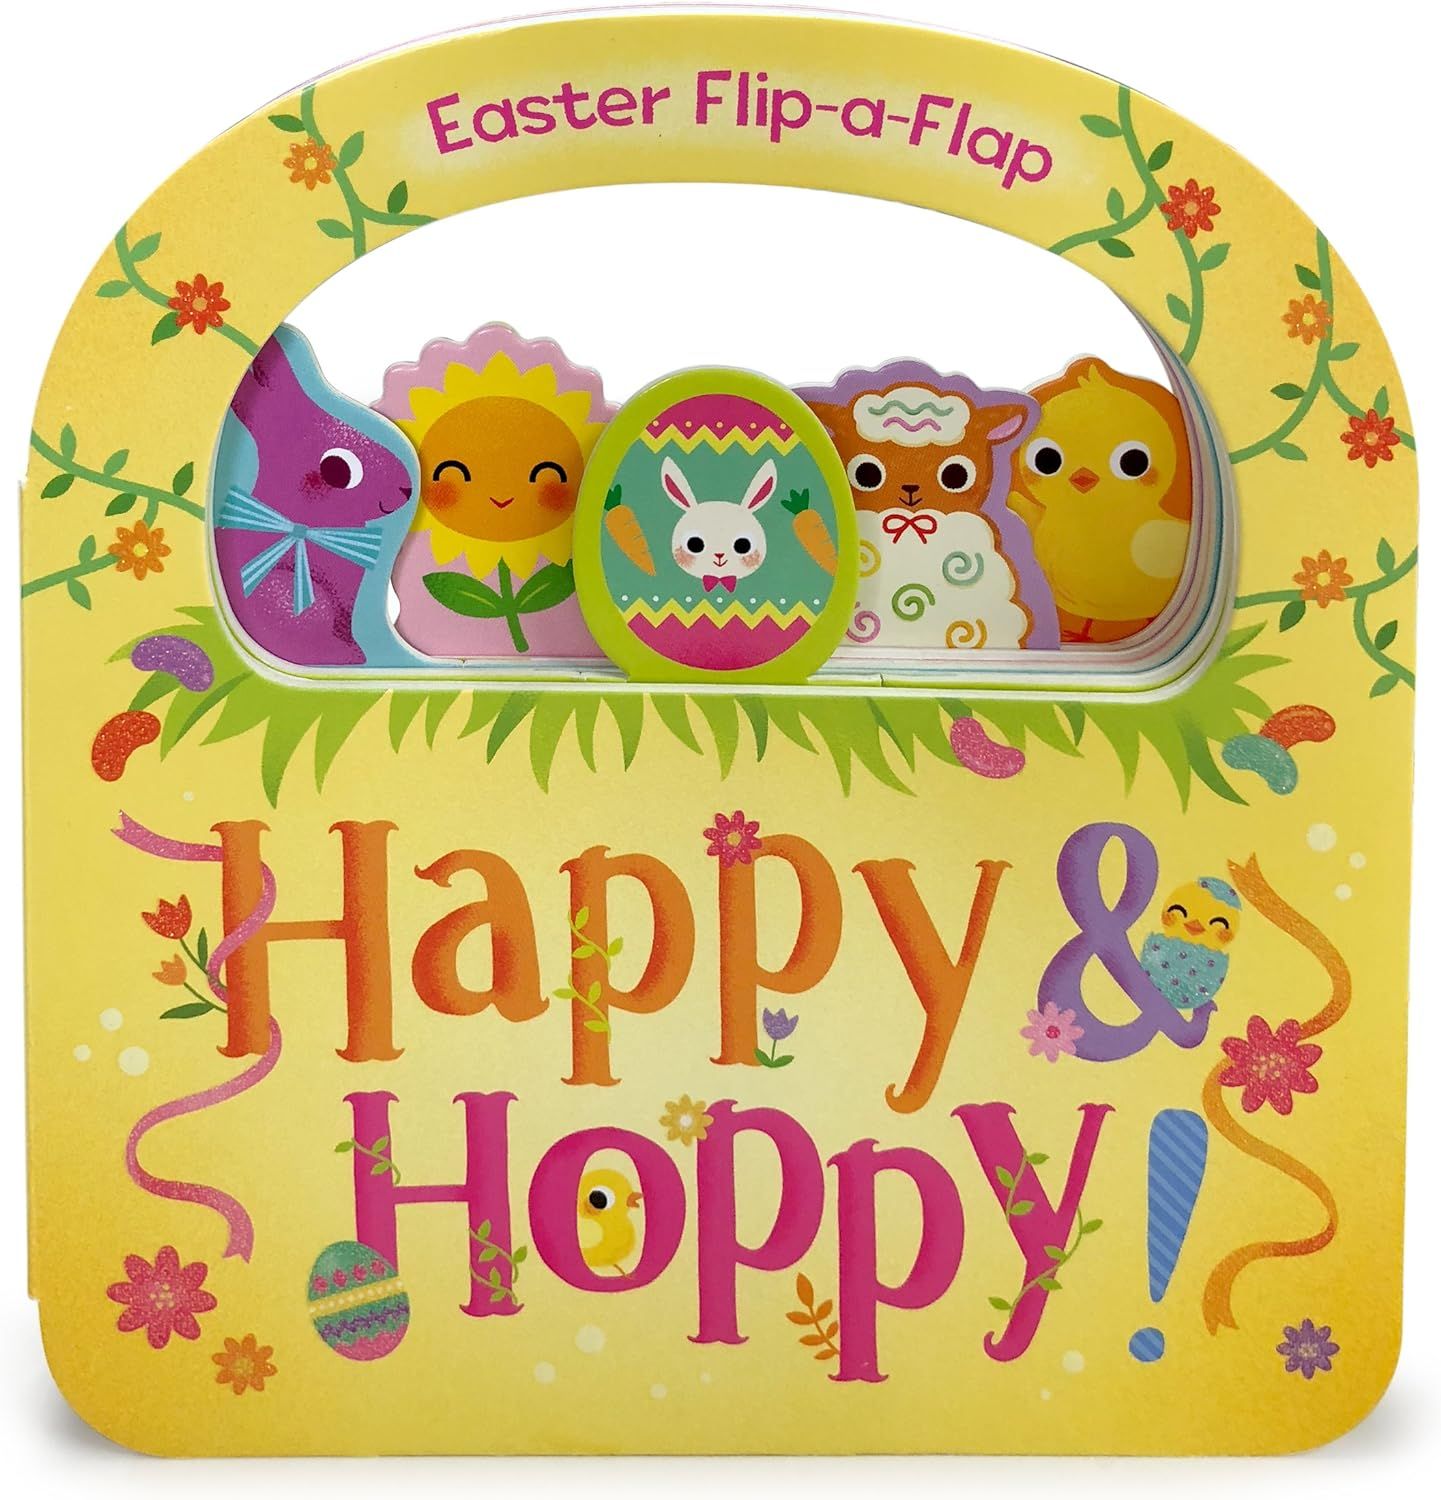 Happy & Hoppy - Children's Flip-a-Flap Activity Board Book for Easter Baskets and Springtime Fun, Ag | Amazon (US)